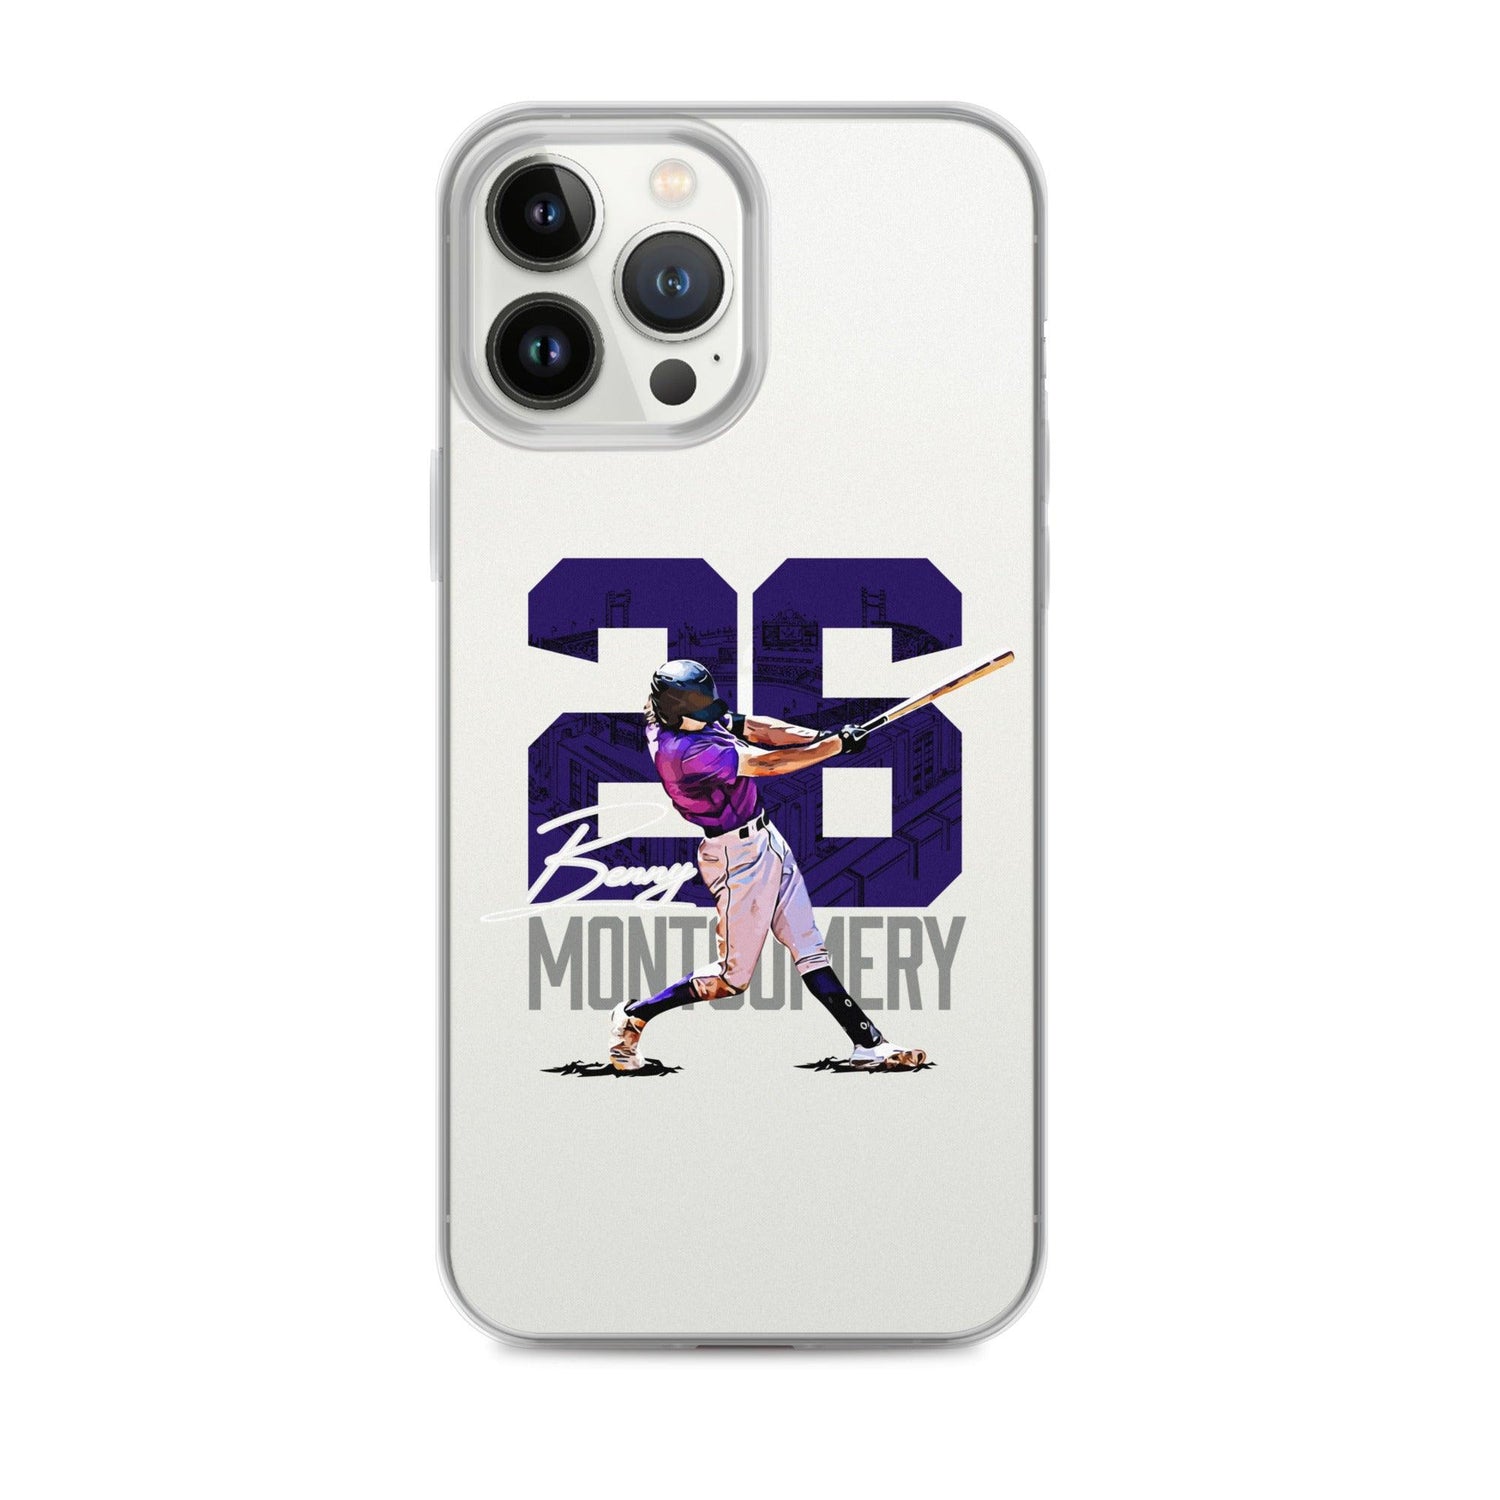 Benny Montgomery "Gameday" iPhone Case - Fan Arch